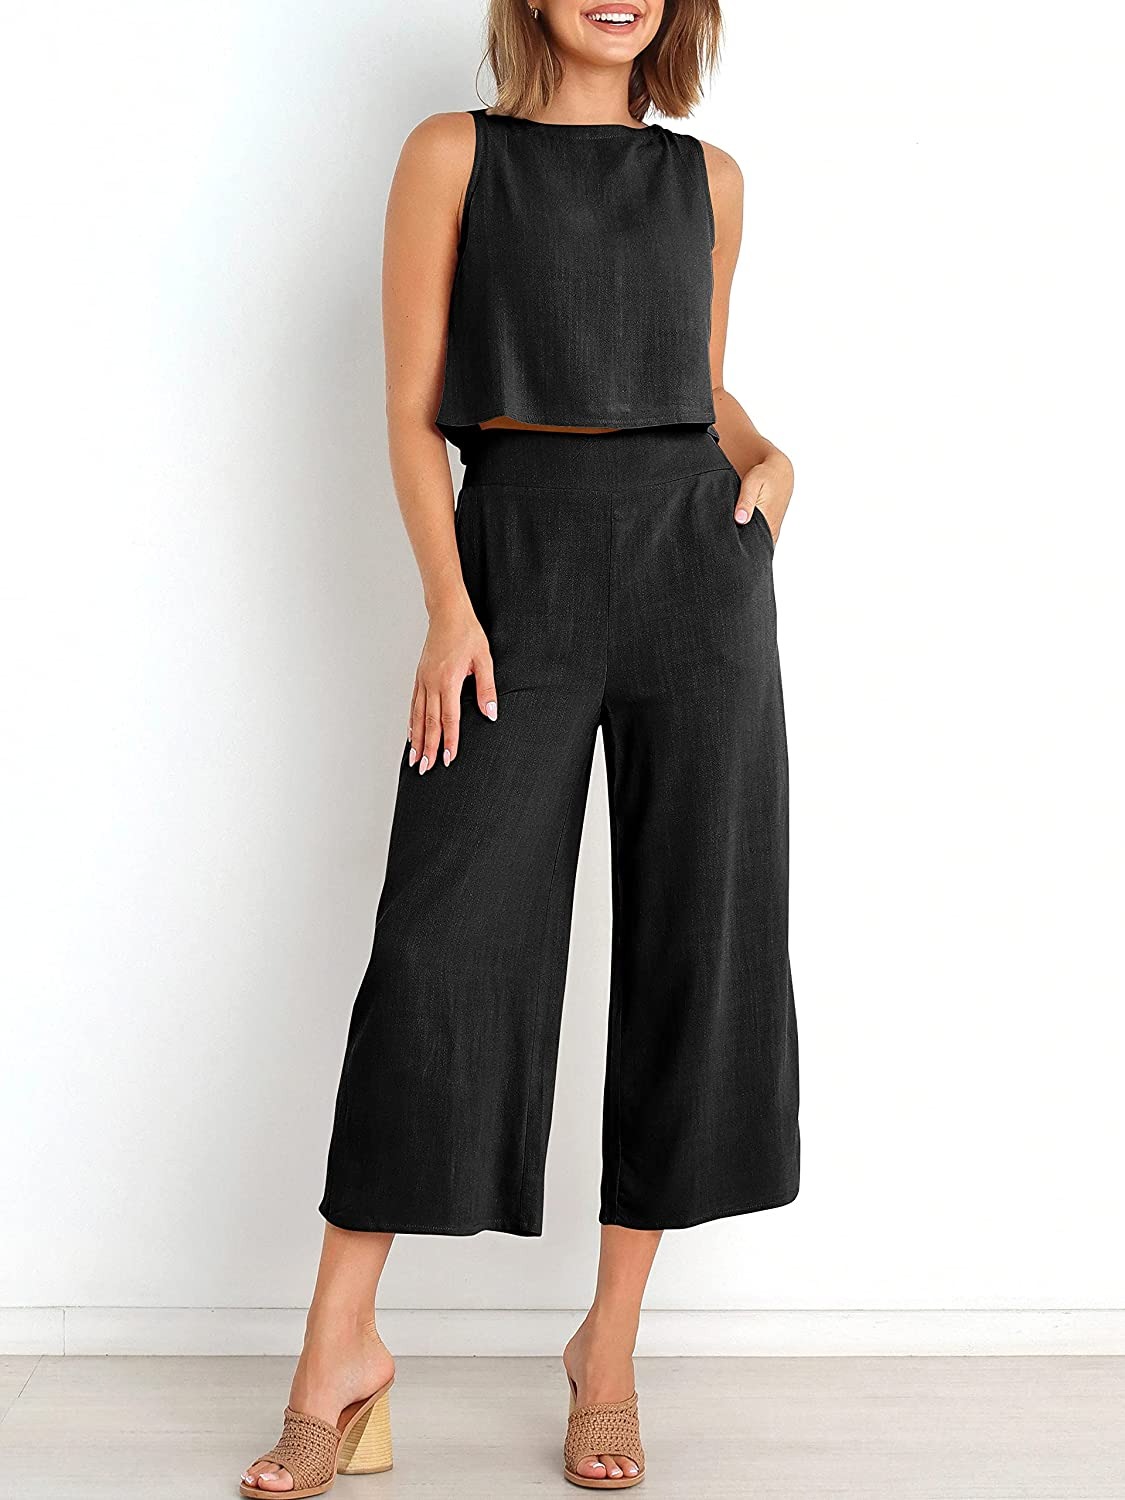 2-Piece Sleeveless Vest Exposed Navel Button Top Cropped Wide Leg Pants Suit